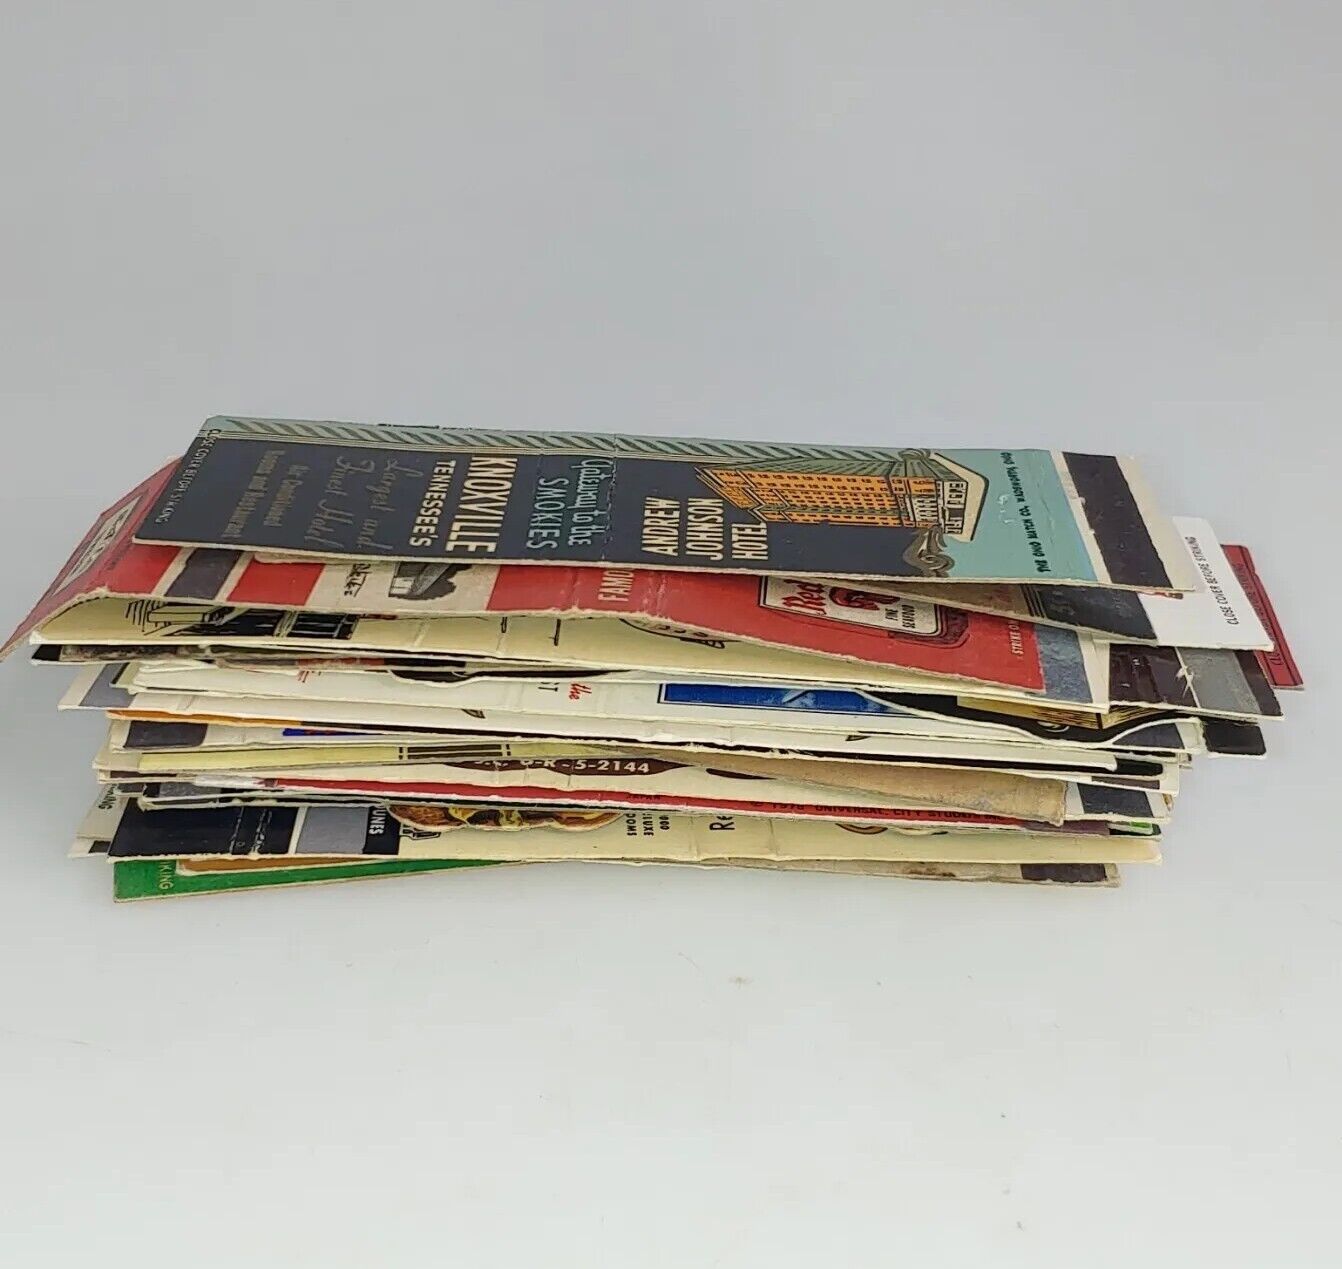 Mixed Vintage Matchbook Lot Of 50 Covers - 1940s to 70s Various - L-003